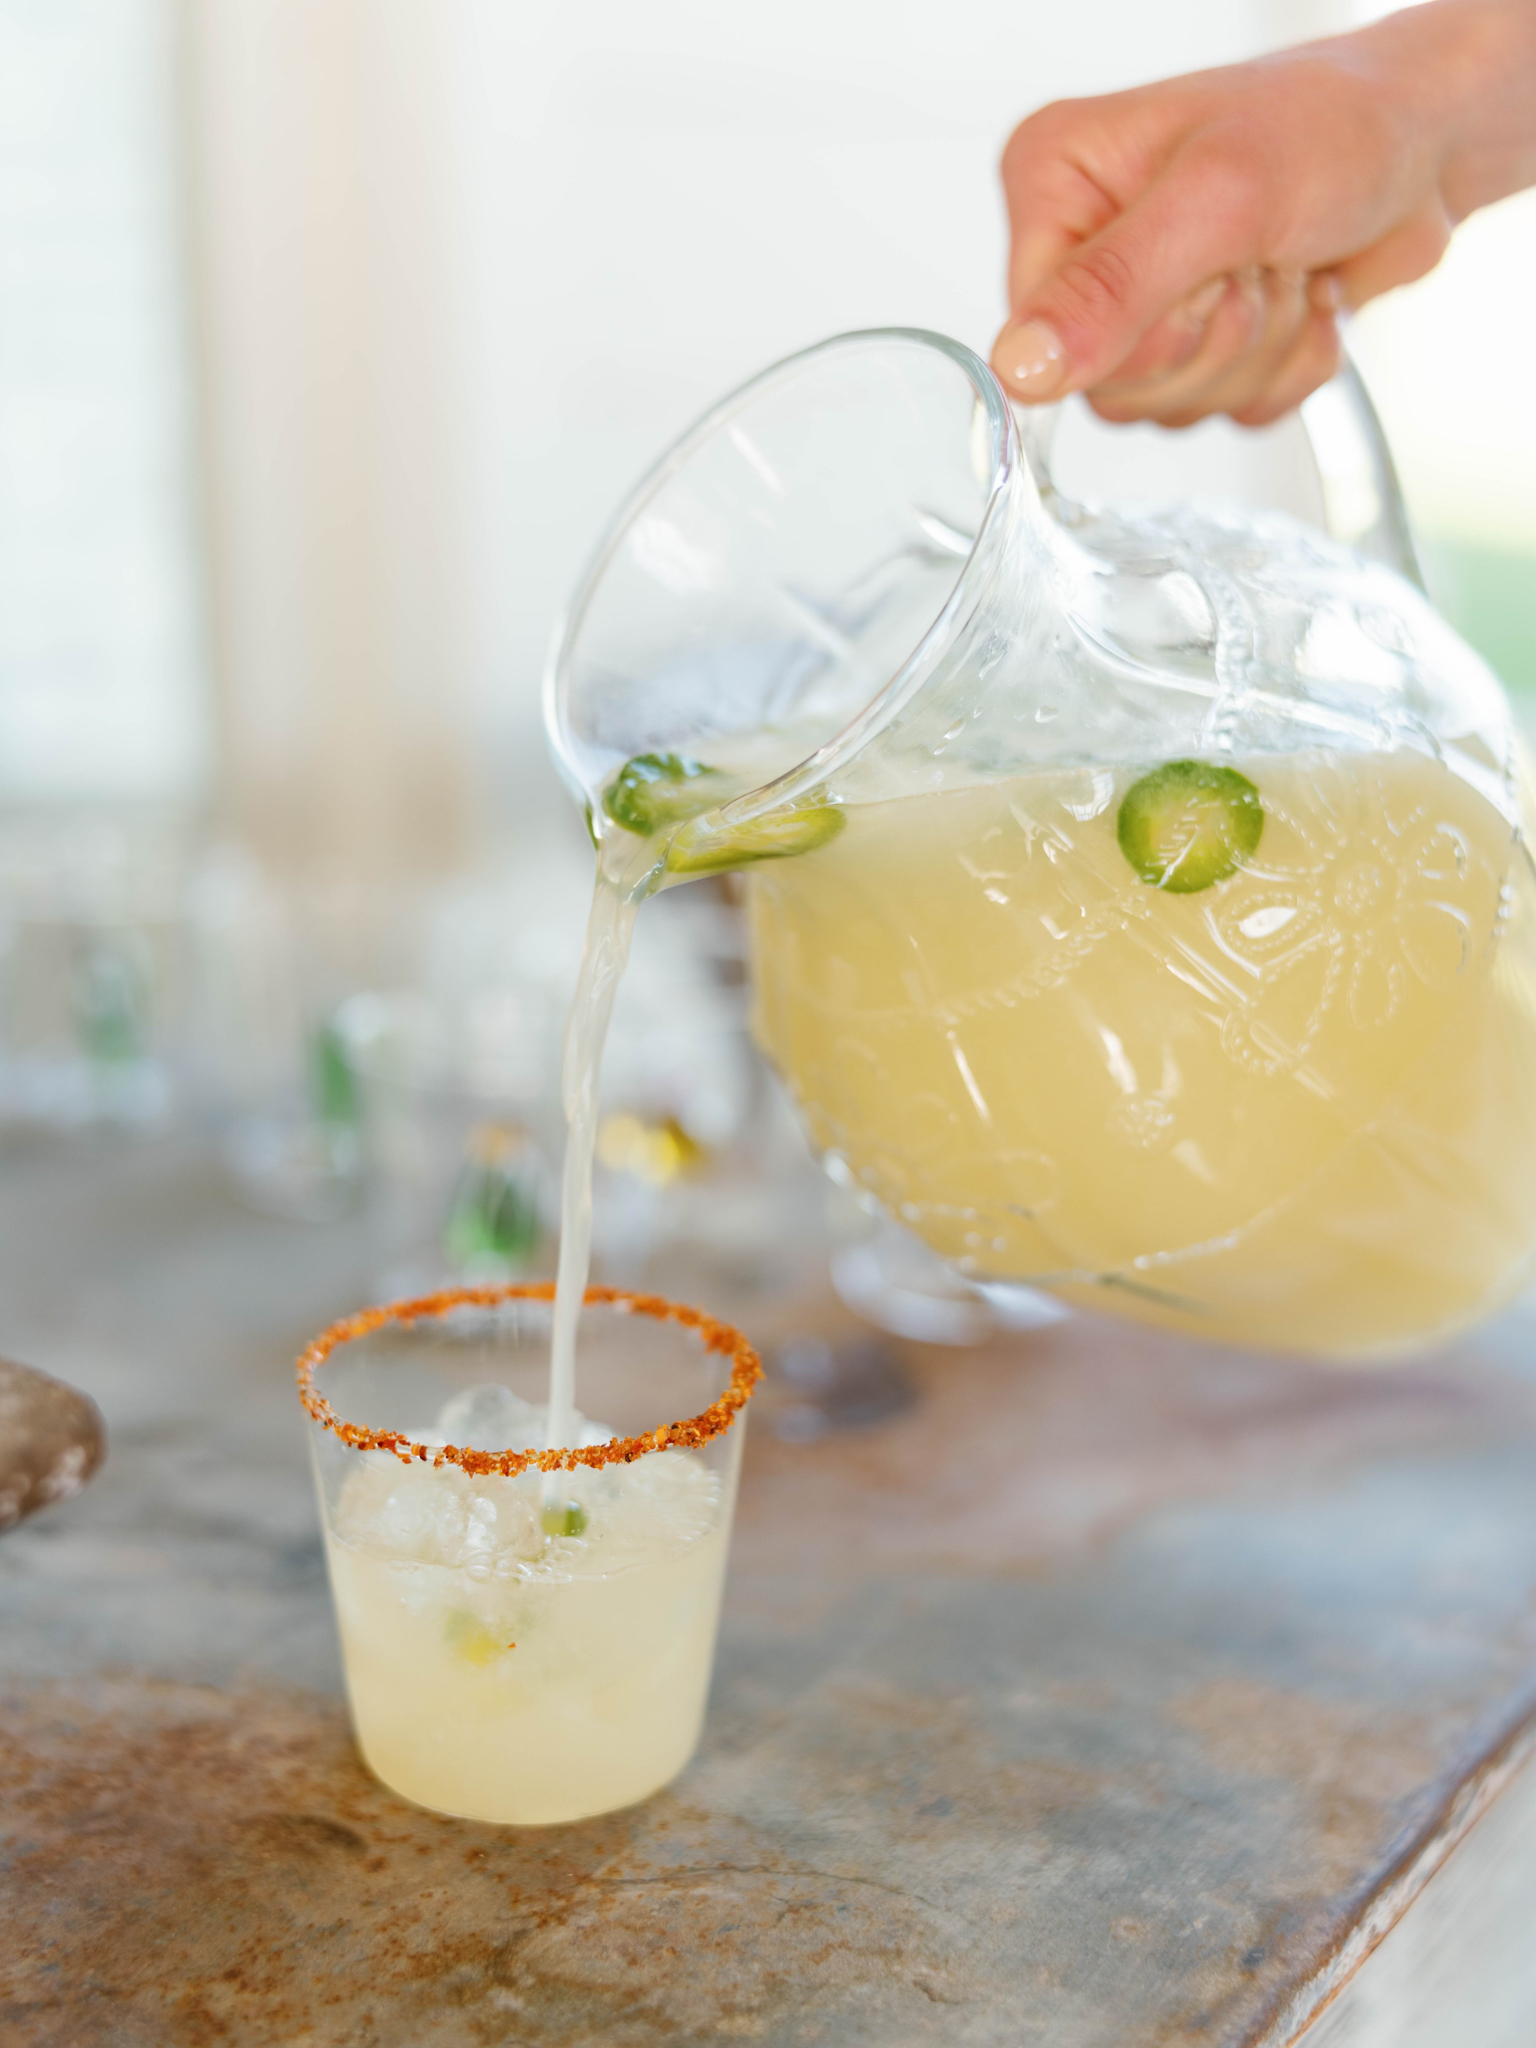 3 Easy Tequila Pitcher Drinks for Cinco De Mayo